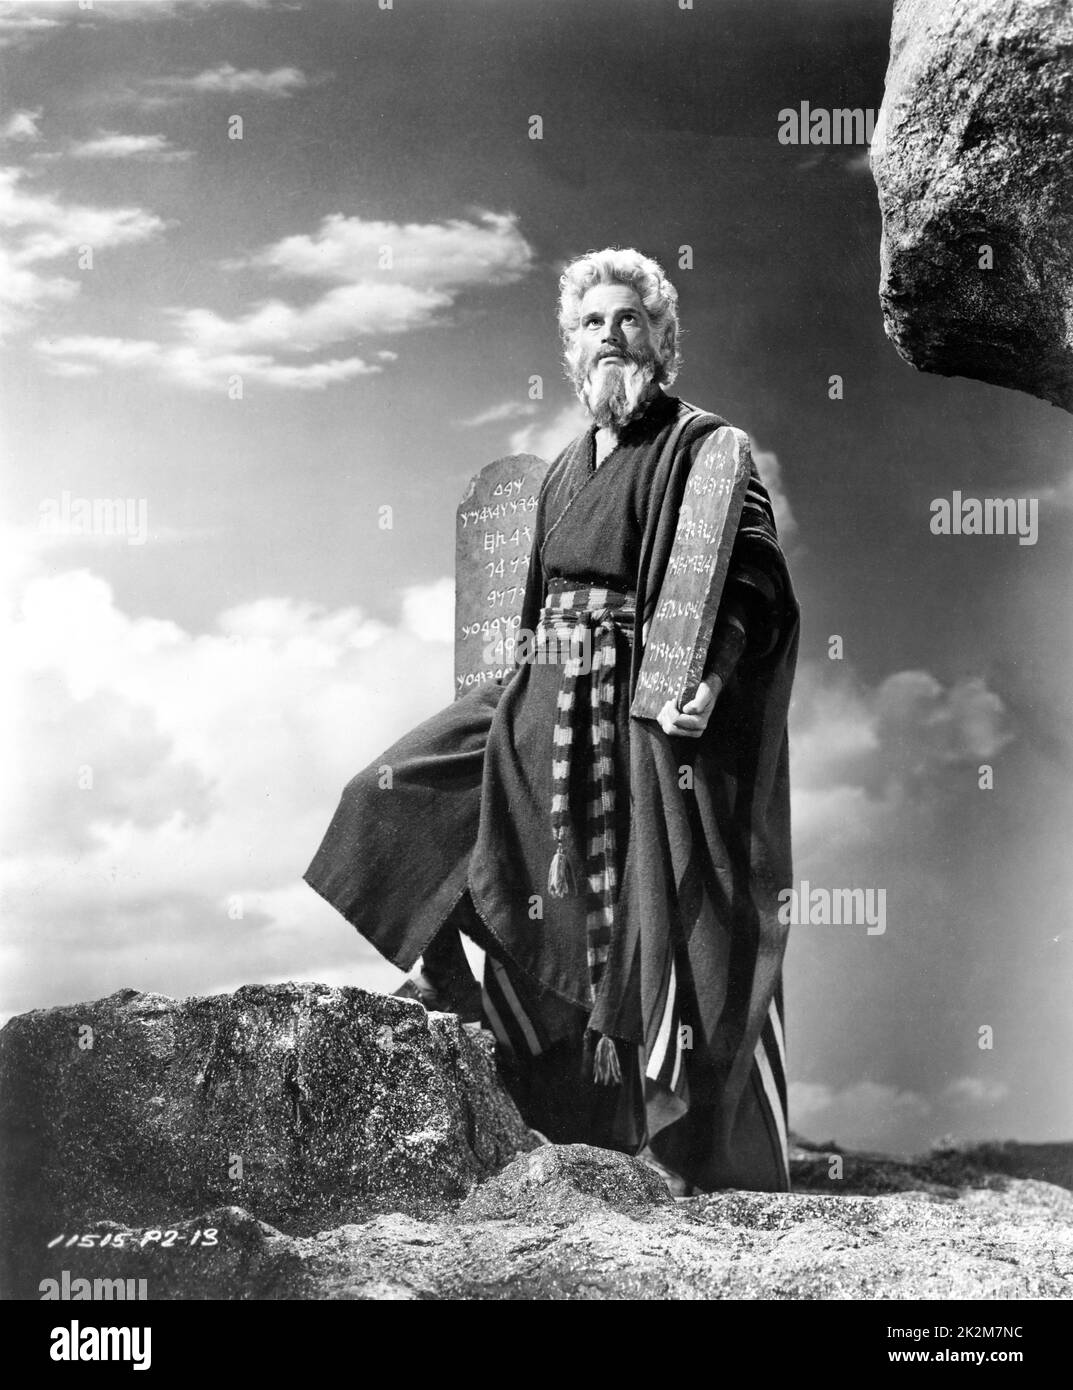 CHARLTON HESTON Portrait as Moses in THE TEN COMMANDMENTS 1956 director CECIL B. DeMILLE Motion Pictures Associates / Paramount Pictures Stock Photo